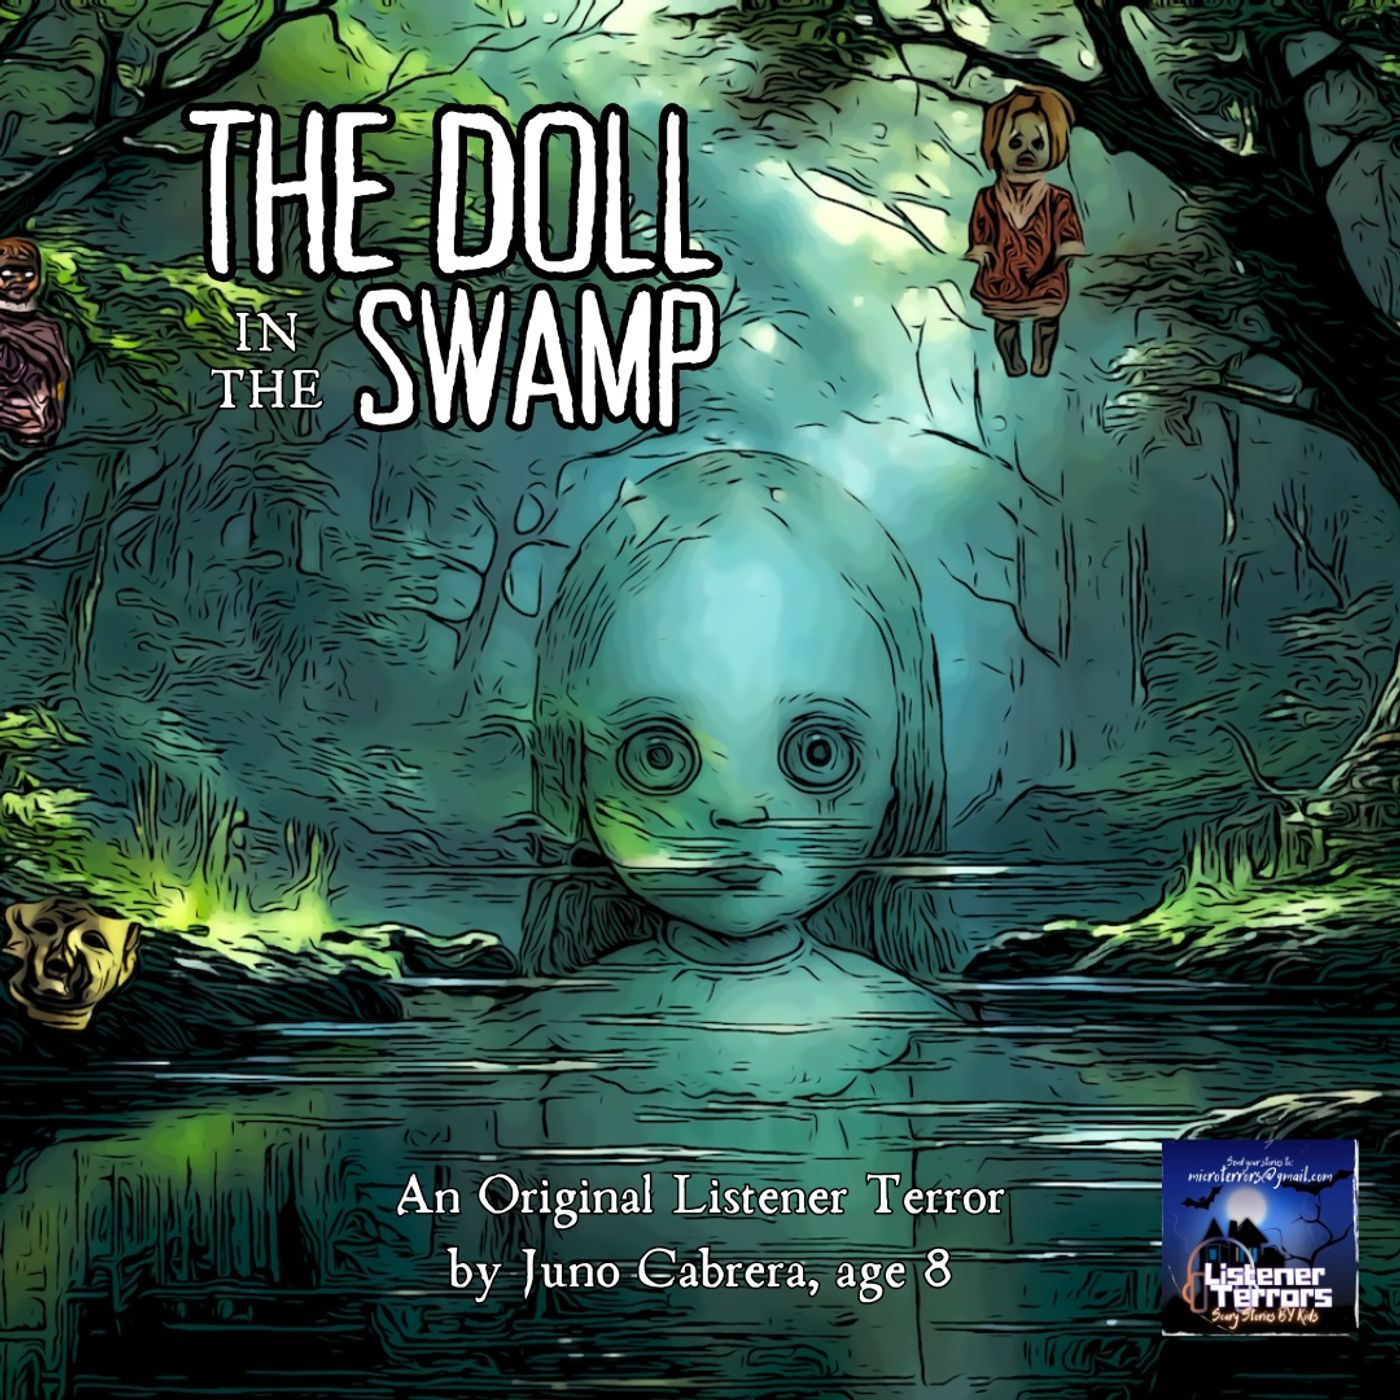 “THE DOLL IN THE SWAMP” by Juno Cabrera, Age 8 #MicroTerrors #ListenerTerrors